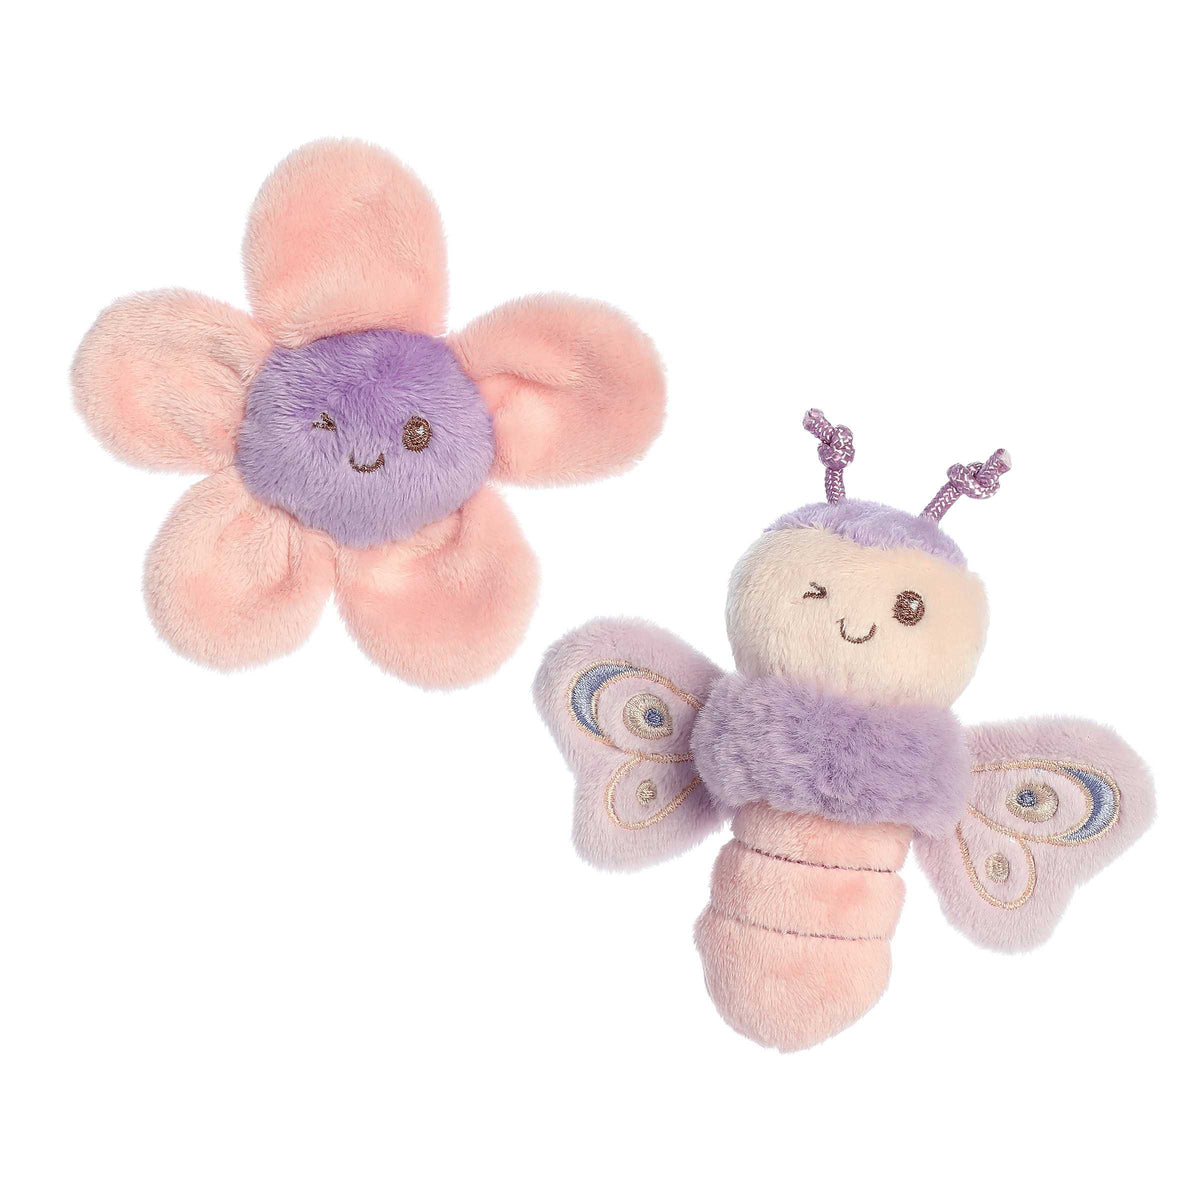 Butterfly plush with rattle and flower with crinkle features, designed for sensory and motor skills development, by ebba.